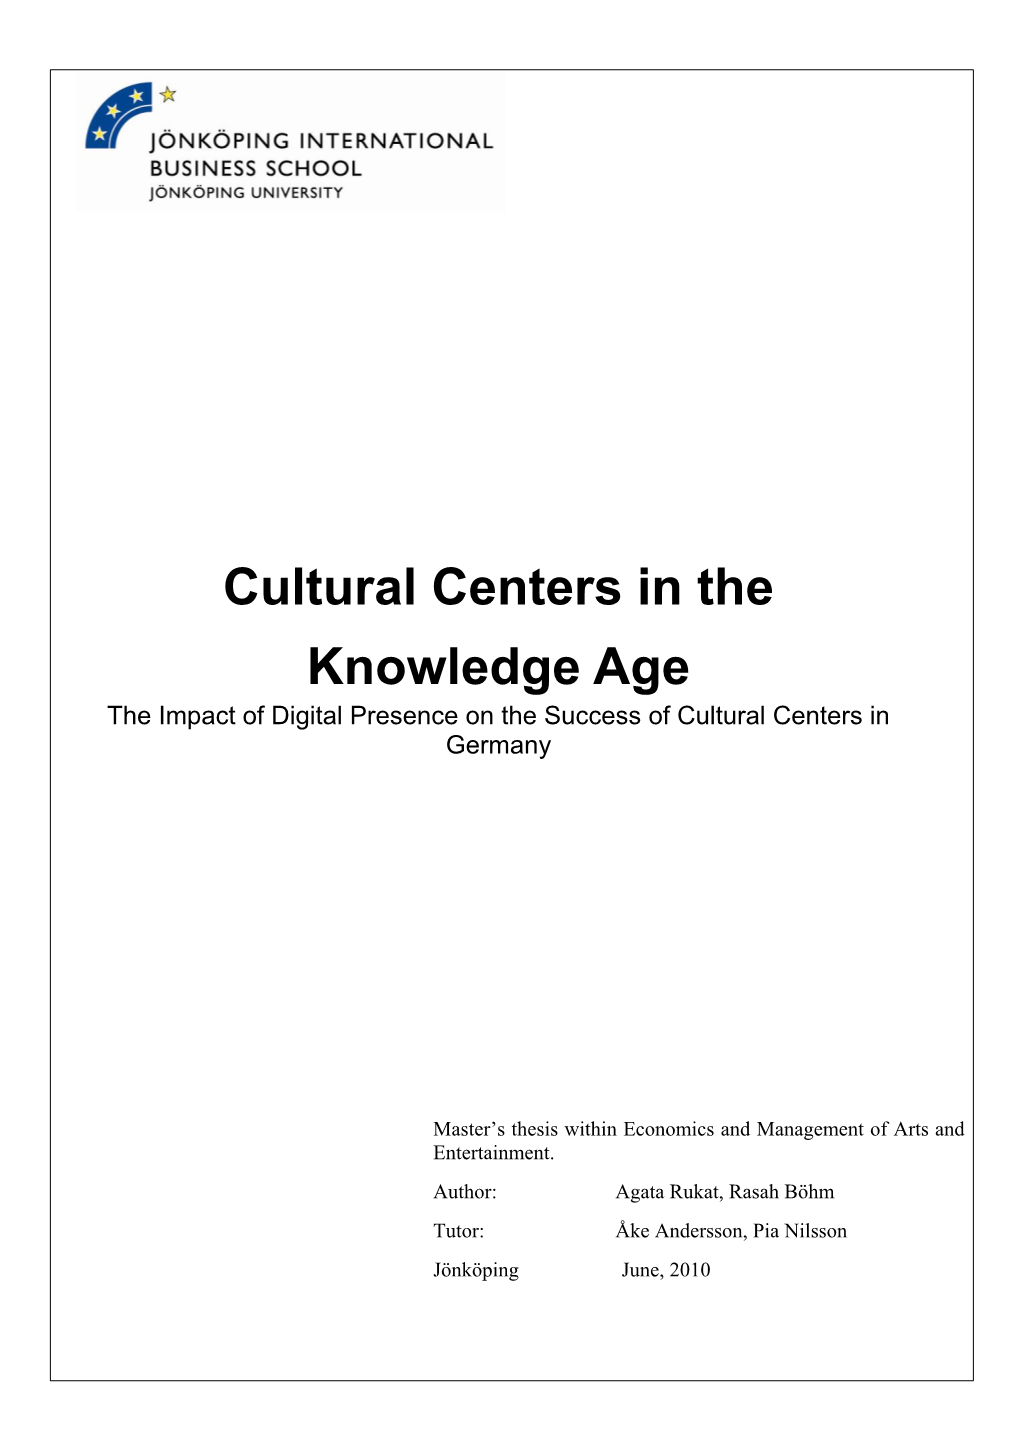 Background on Cultural Centers